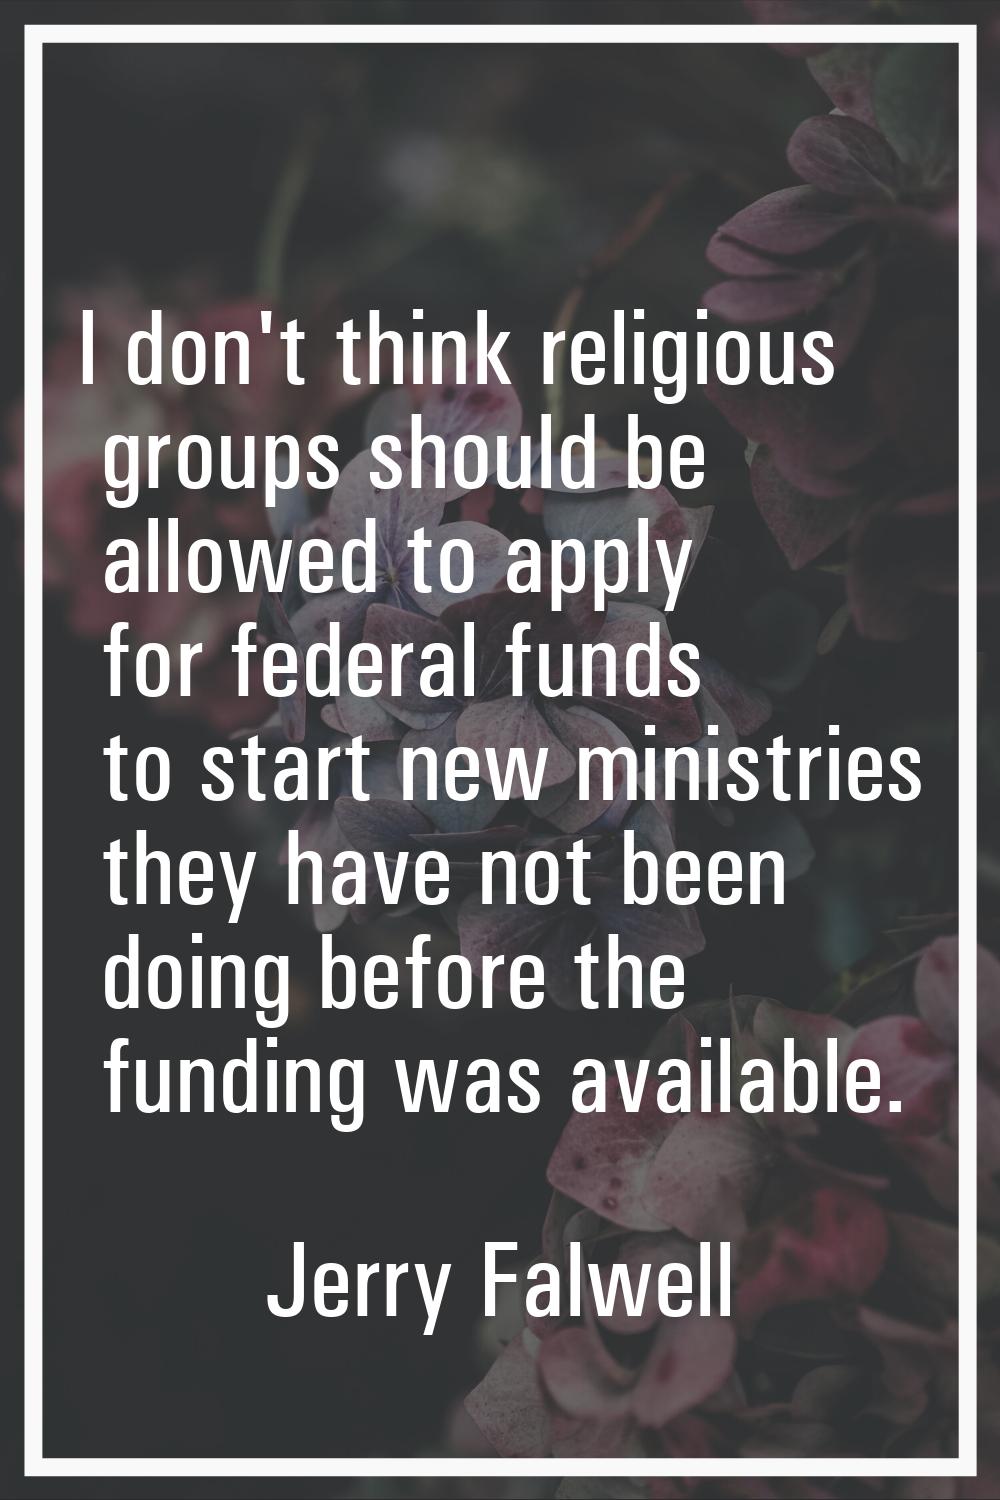 I don't think religious groups should be allowed to apply for federal funds to start new ministries